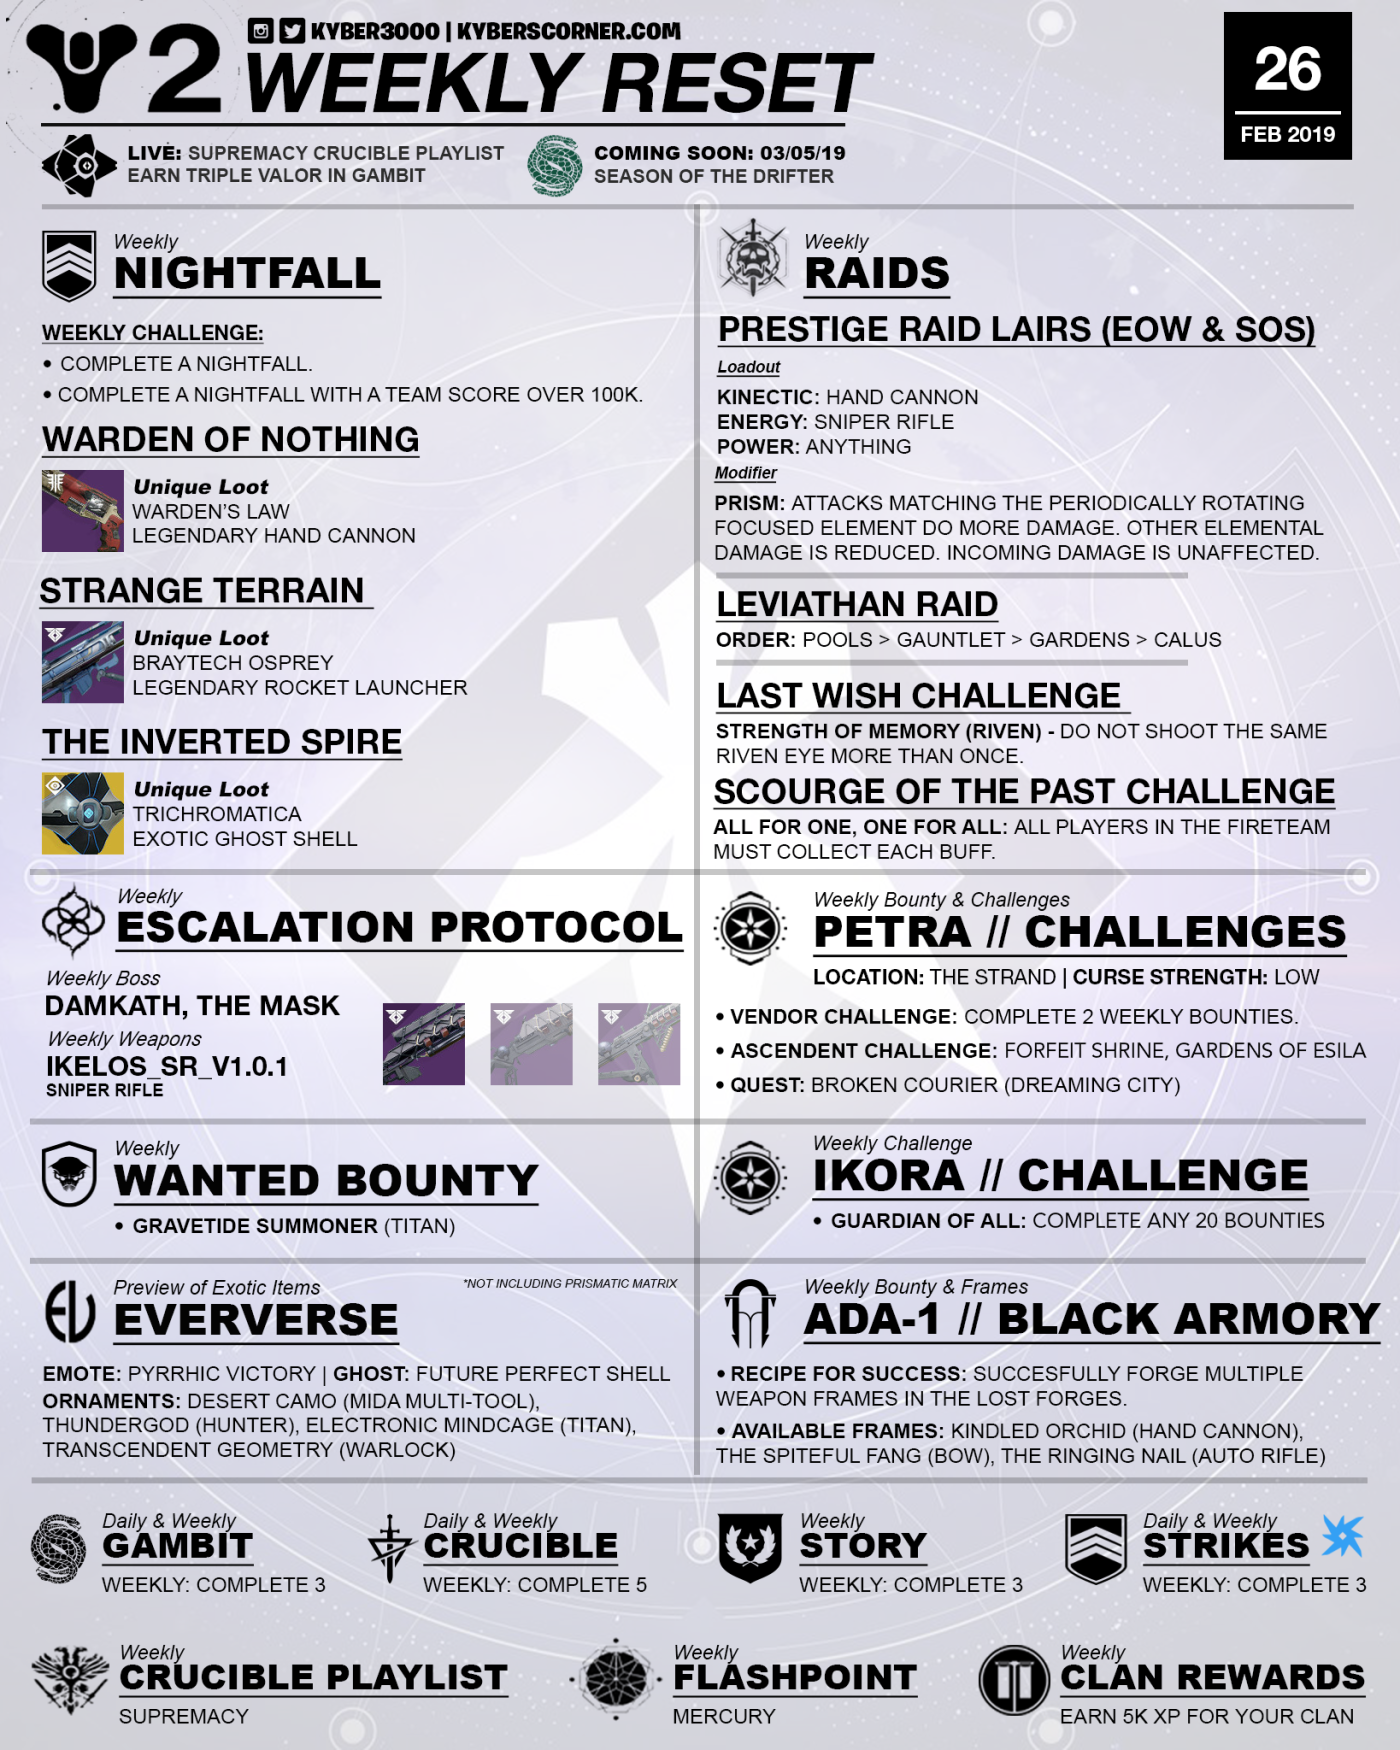 destiny-2-weekly-reset-by-kyber3000-02-26-19-1.png